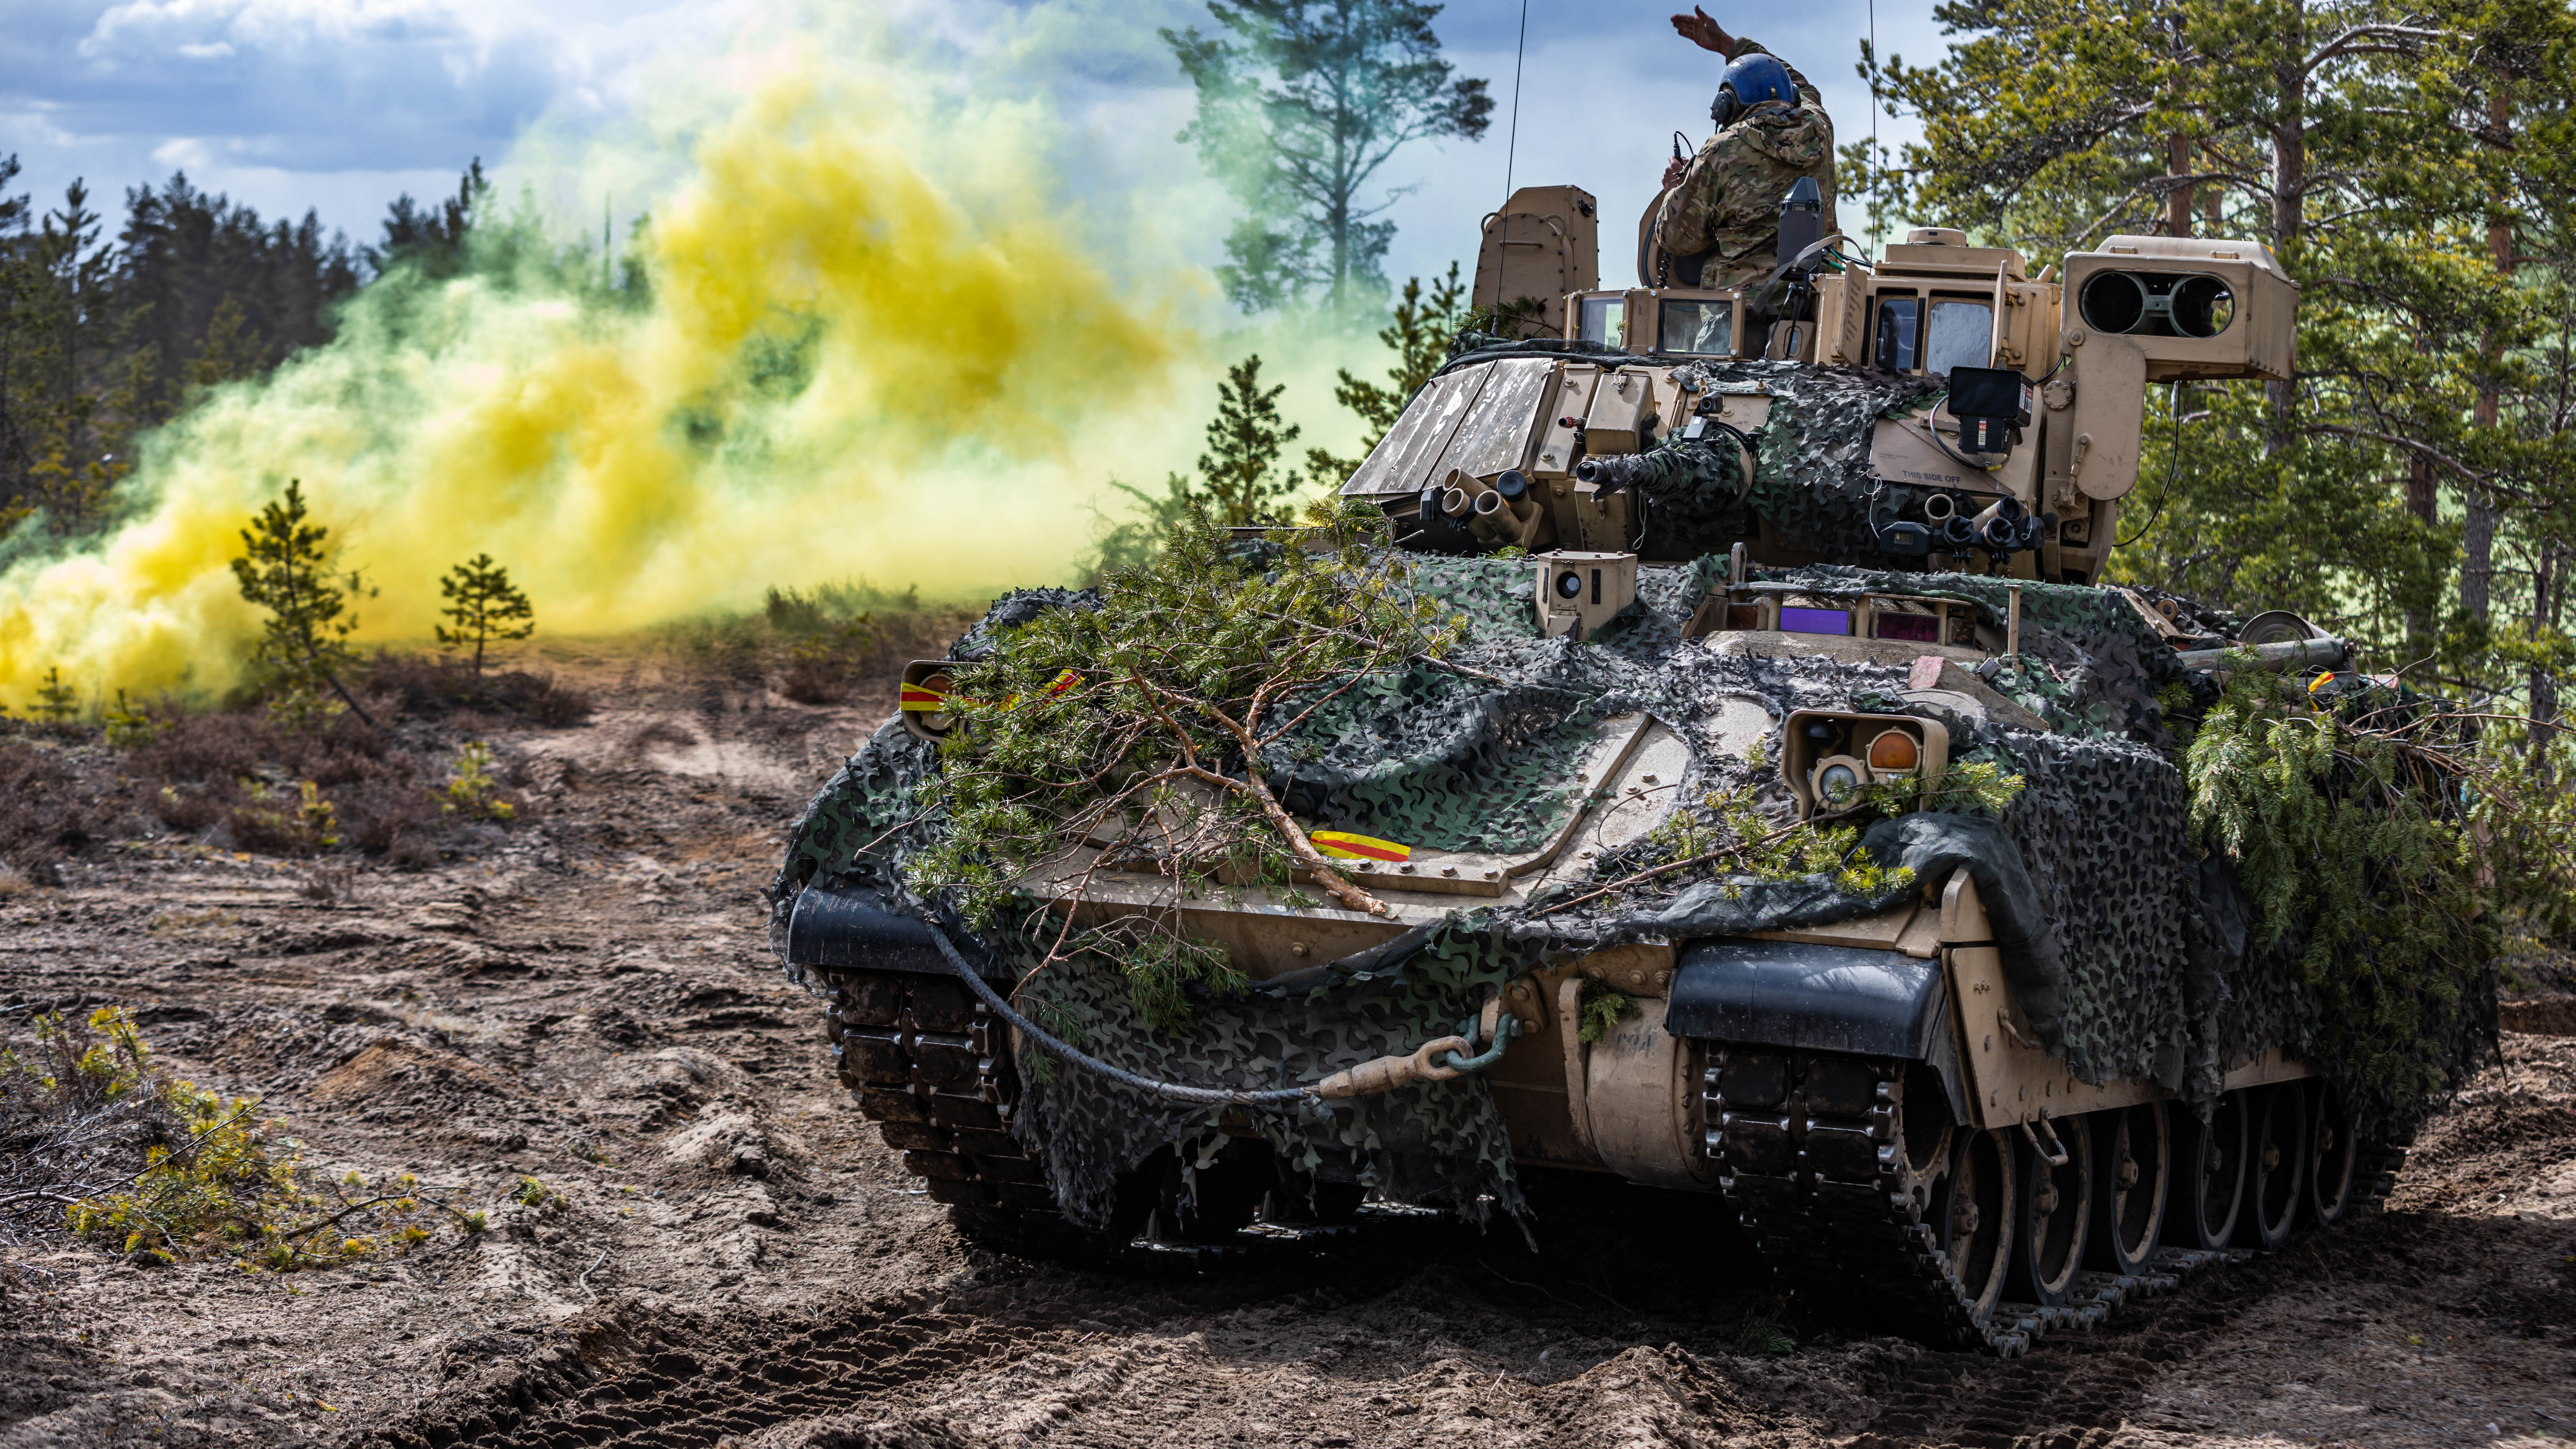 Soldiers with the 2nd Armored Brigade Combat Team, 1st Cavalry Division, maneuver an M2 Bradley Fighting Vehicle during an exercise in Niinisalo, Finland. (Credit: U.S. Army/Sgt. John Schoebel)